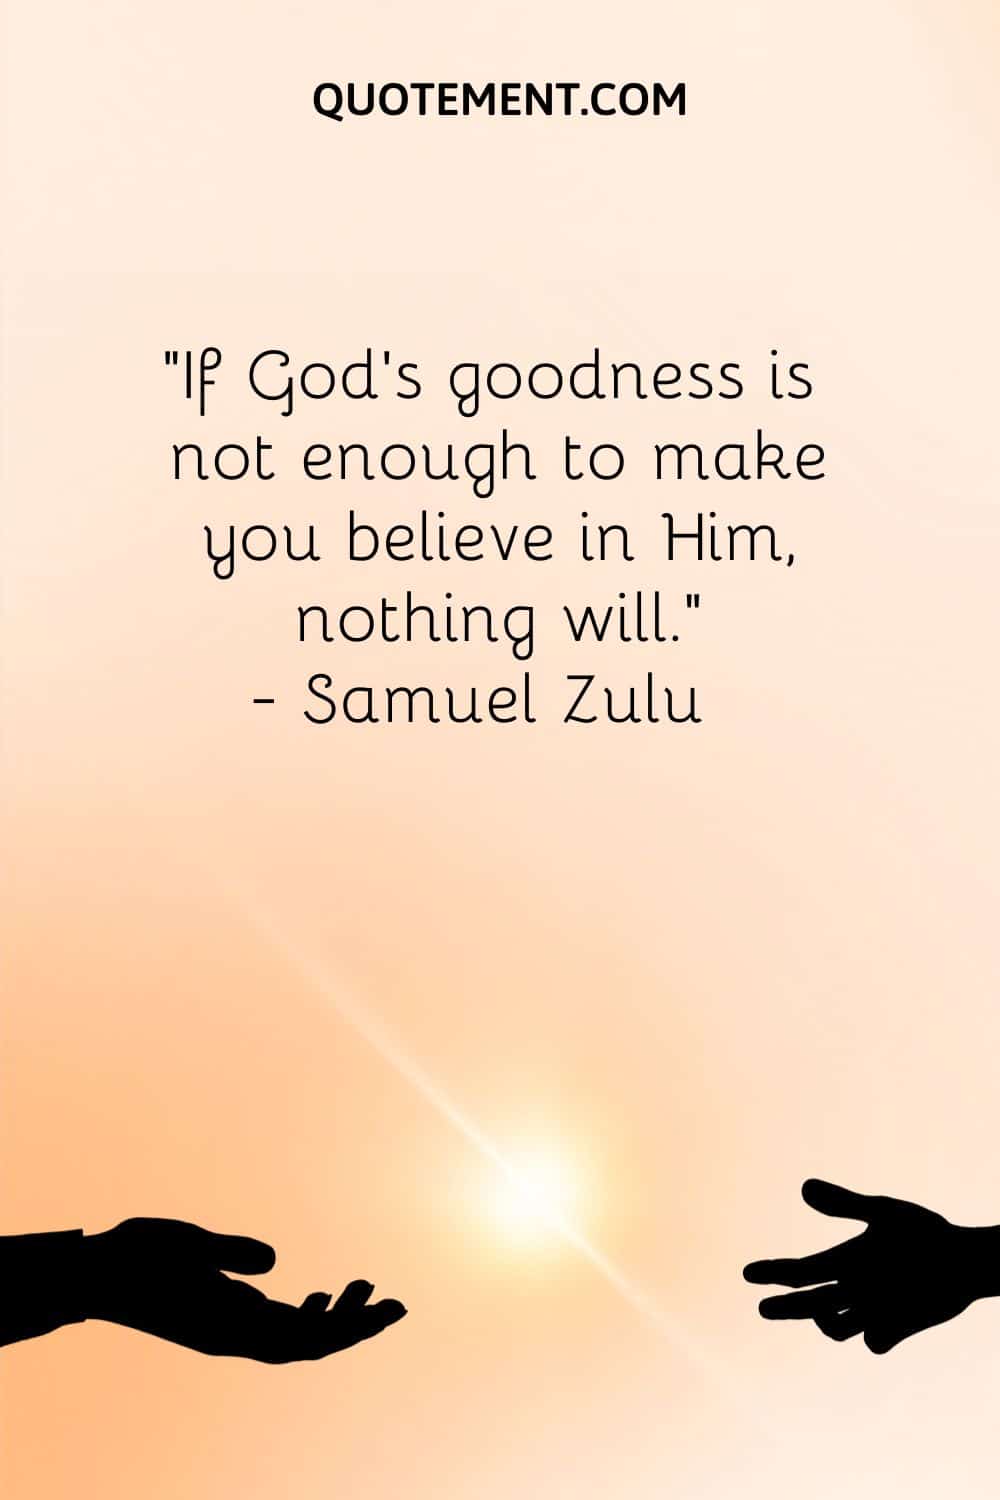 “If God’s goodness is not enough to make you believe in Him, nothing will.” — Samuel Zulu